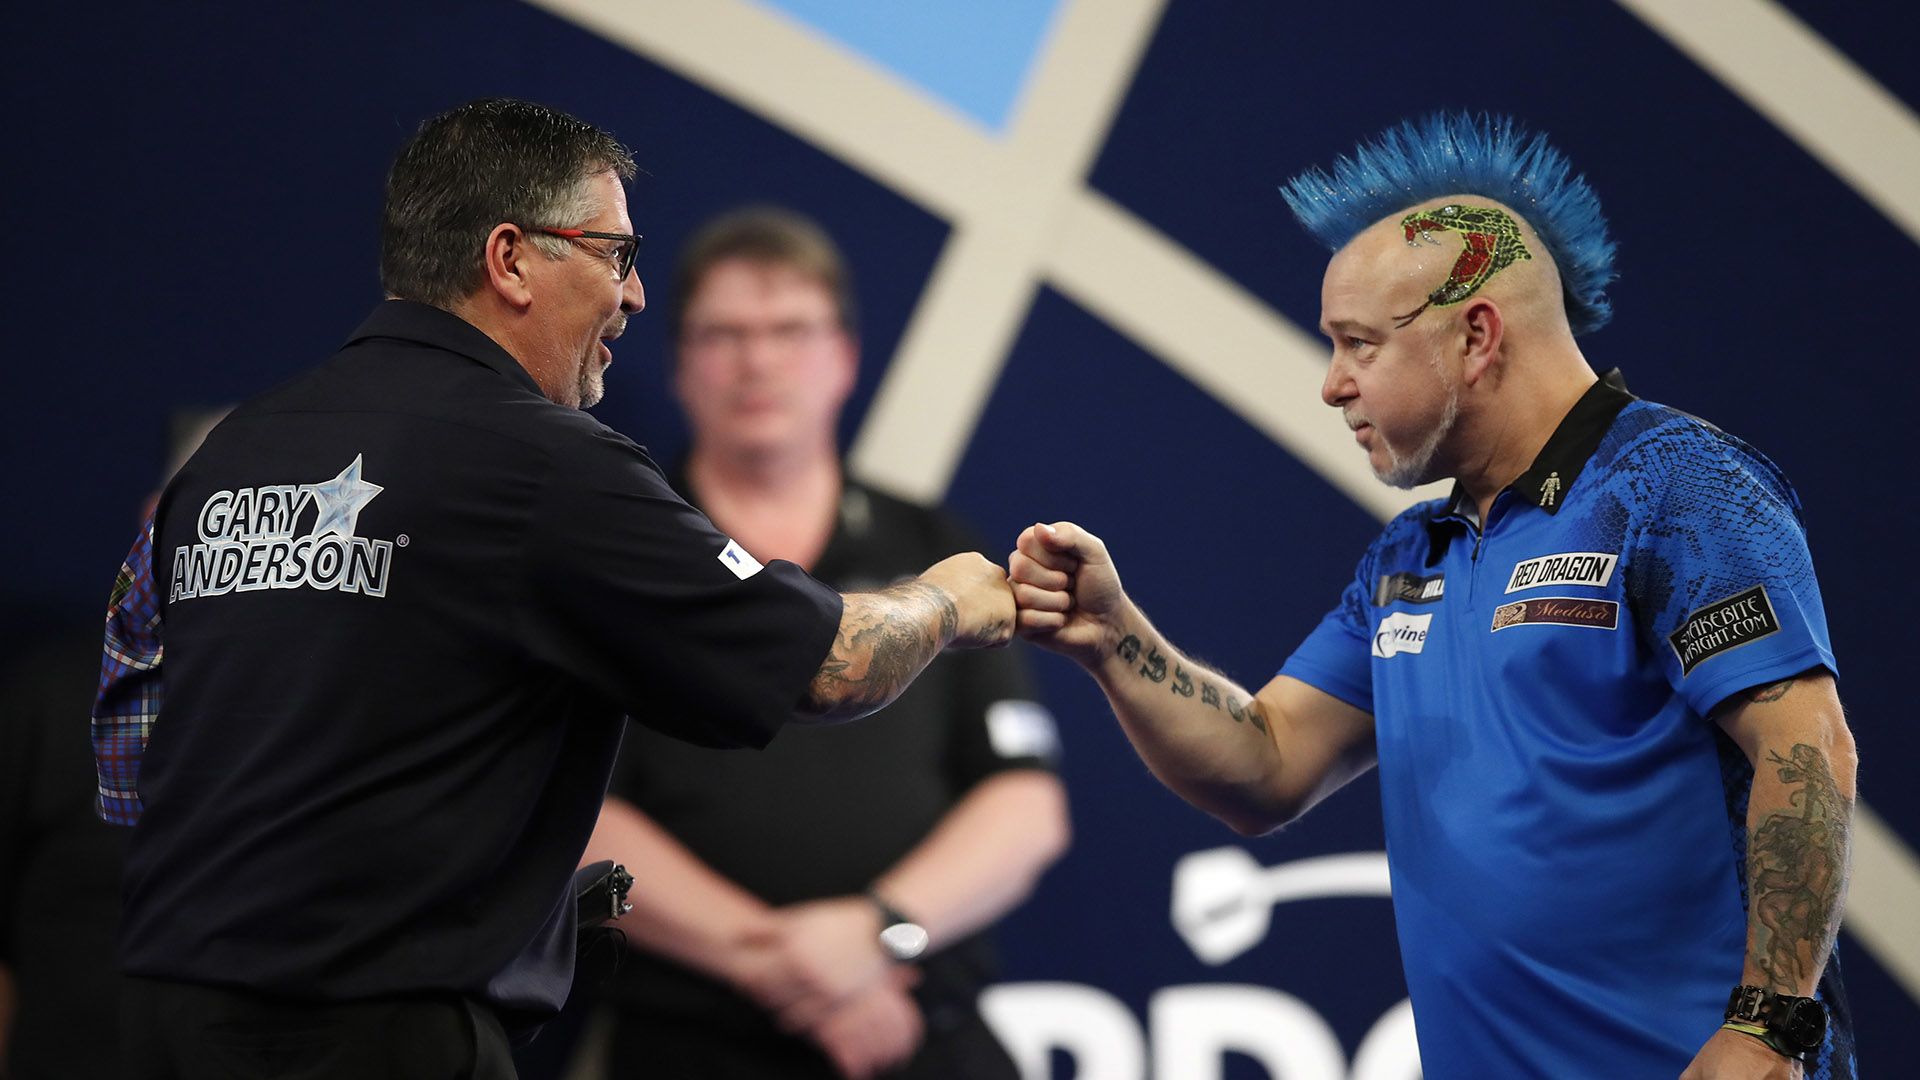 Peter Wright vs. Gary Anderson Predictions, Betting Tips & Odds │31 MARCH, 2022